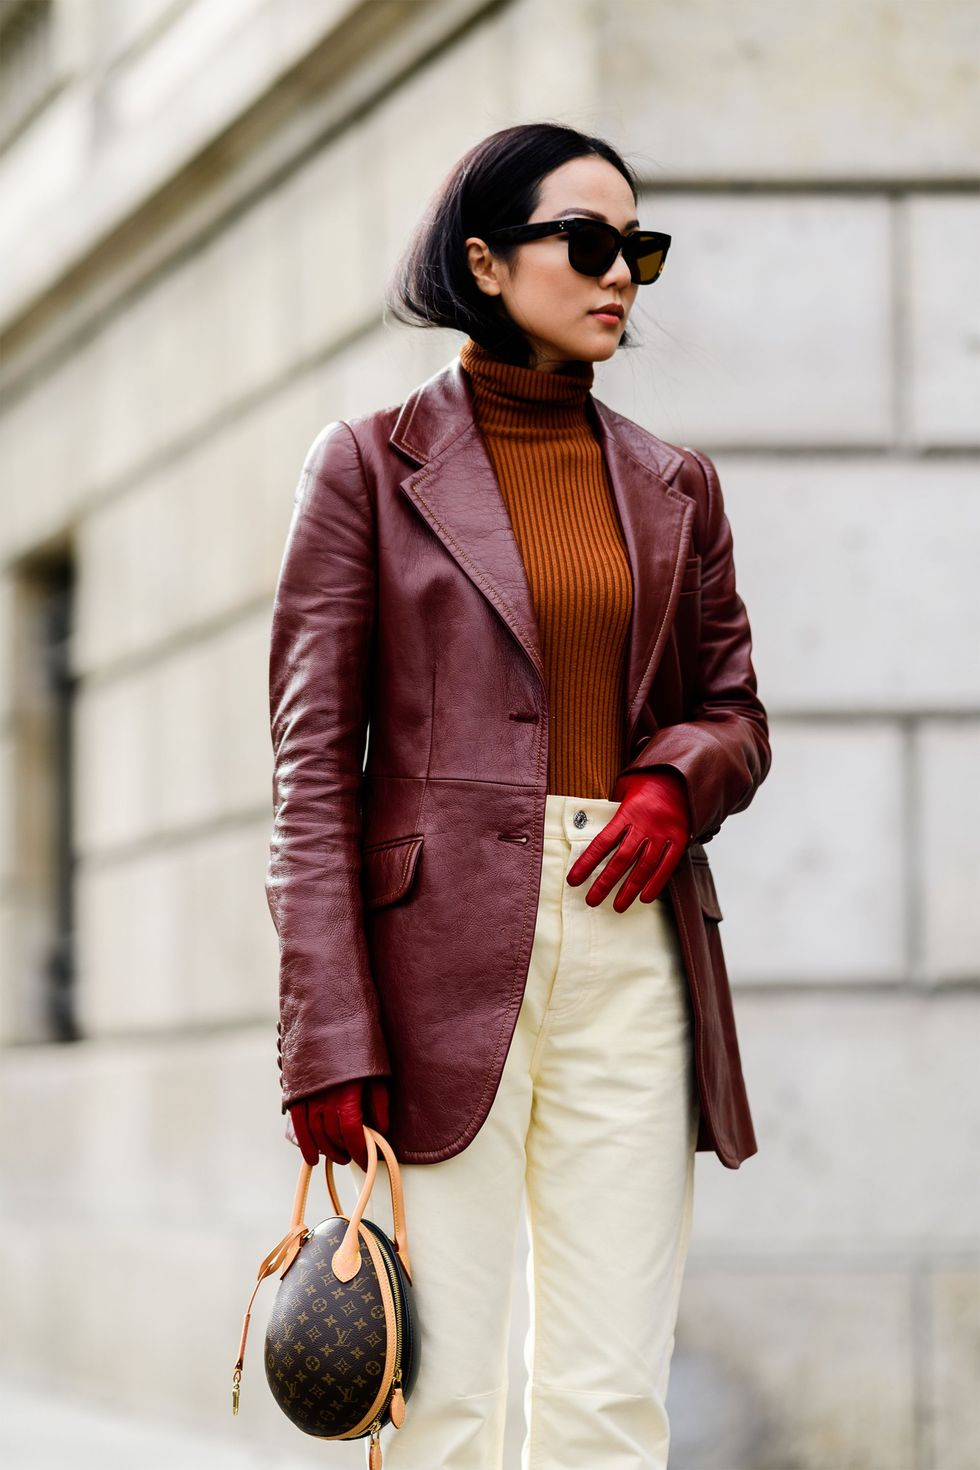 Top 13 Burgundy Blazer Outfit Ideas for Women: Ultimate Style Guide